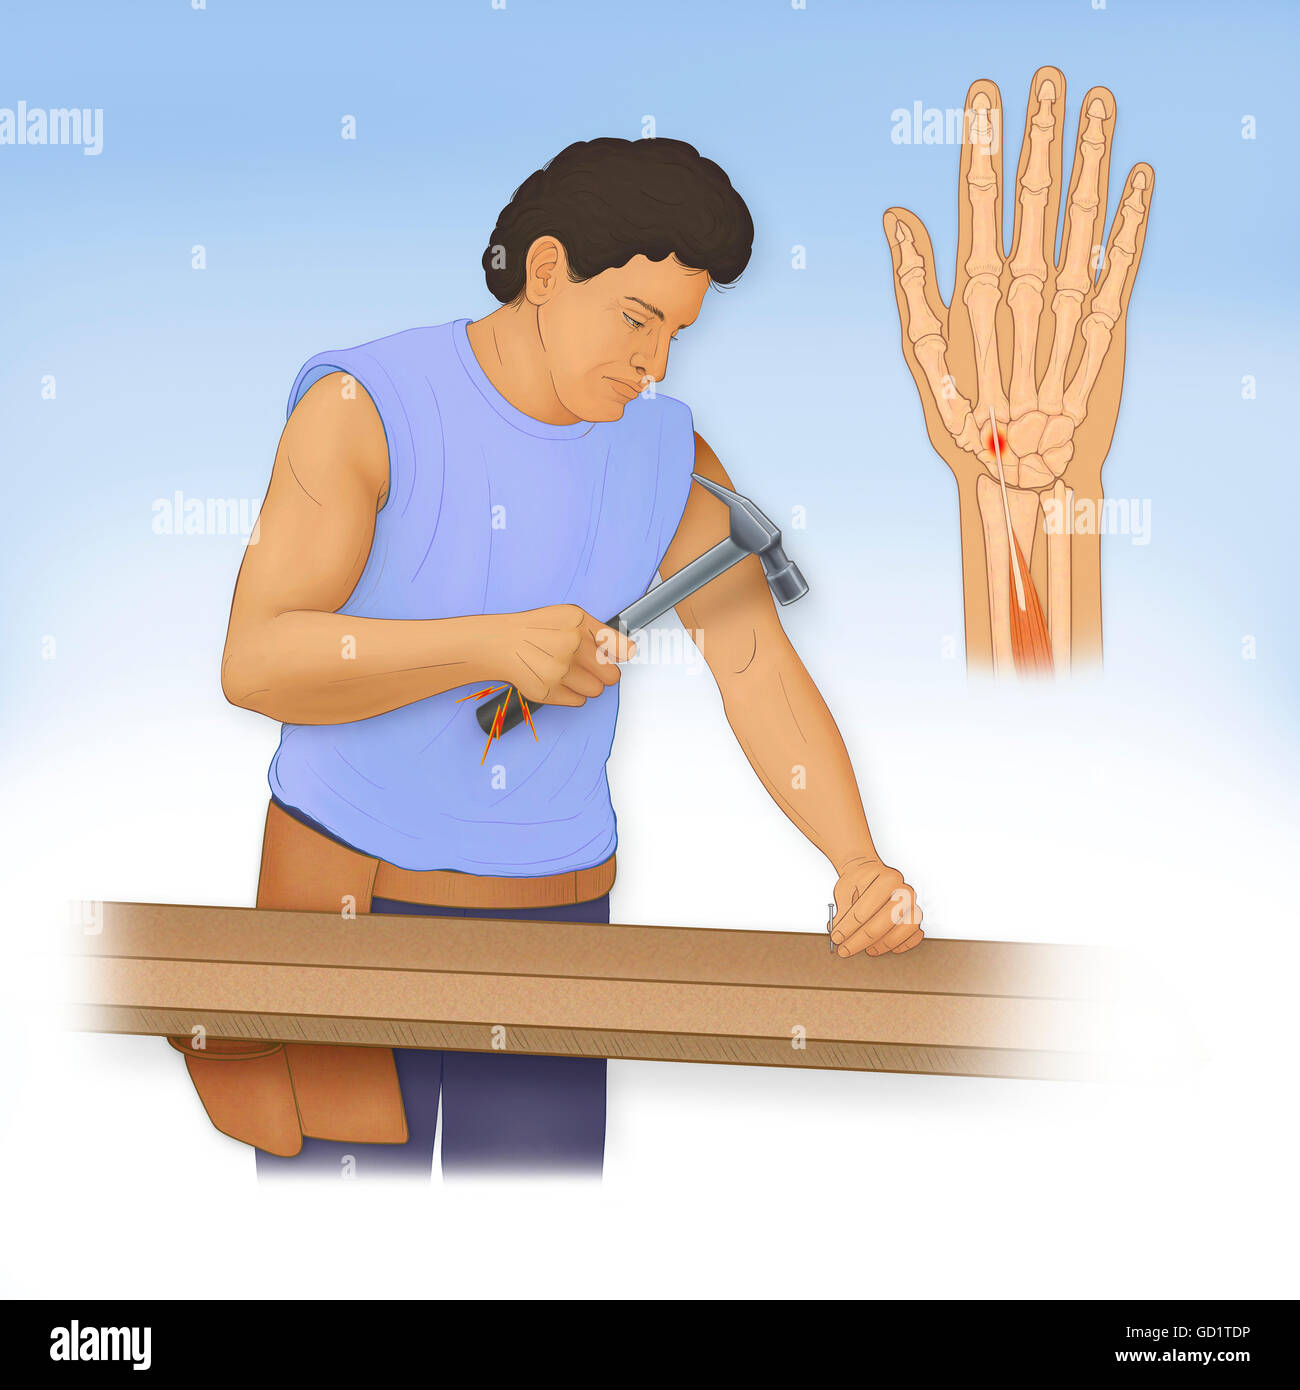 Illustration of the FlexorCarpi Radialis Tendinitis, caused by repetitive trauma such as prolonged use of a heavy hammer Stock Photo